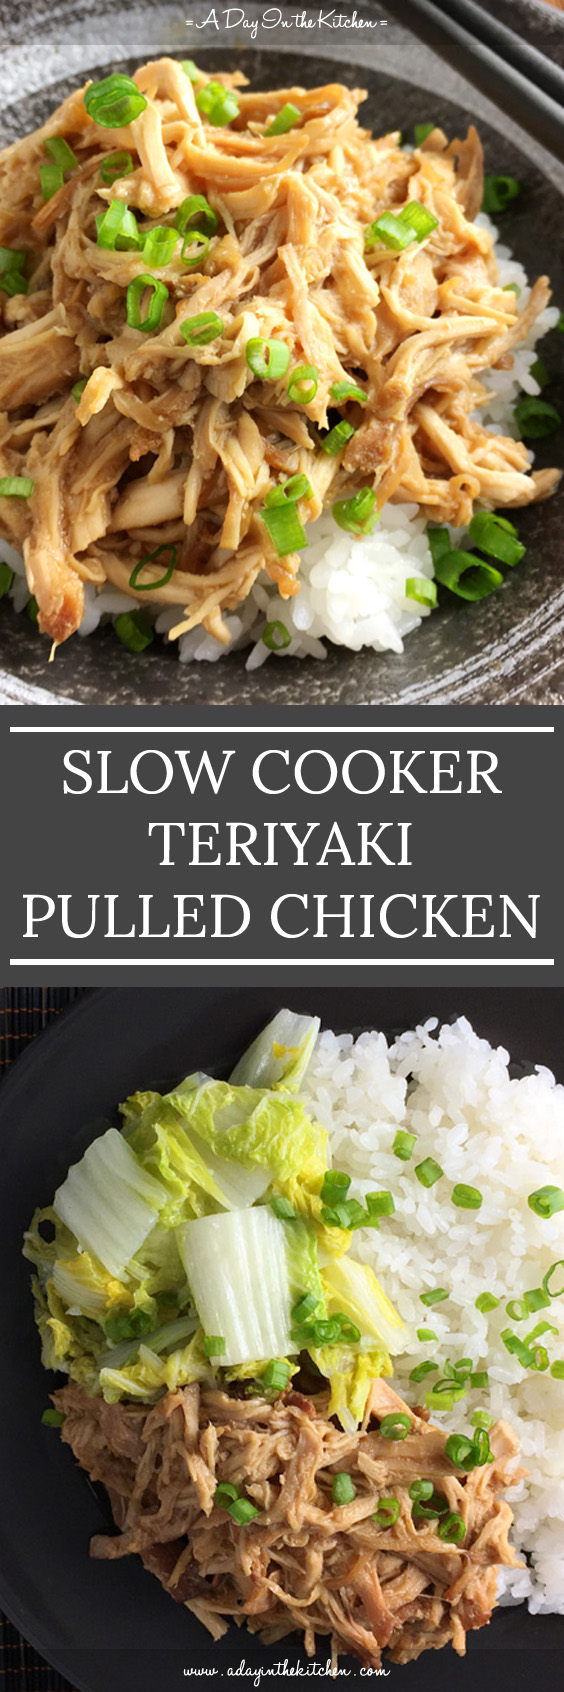 Slow Cooker Teriyaki Pulled Chicken | A DAY IN THE KITCHEN